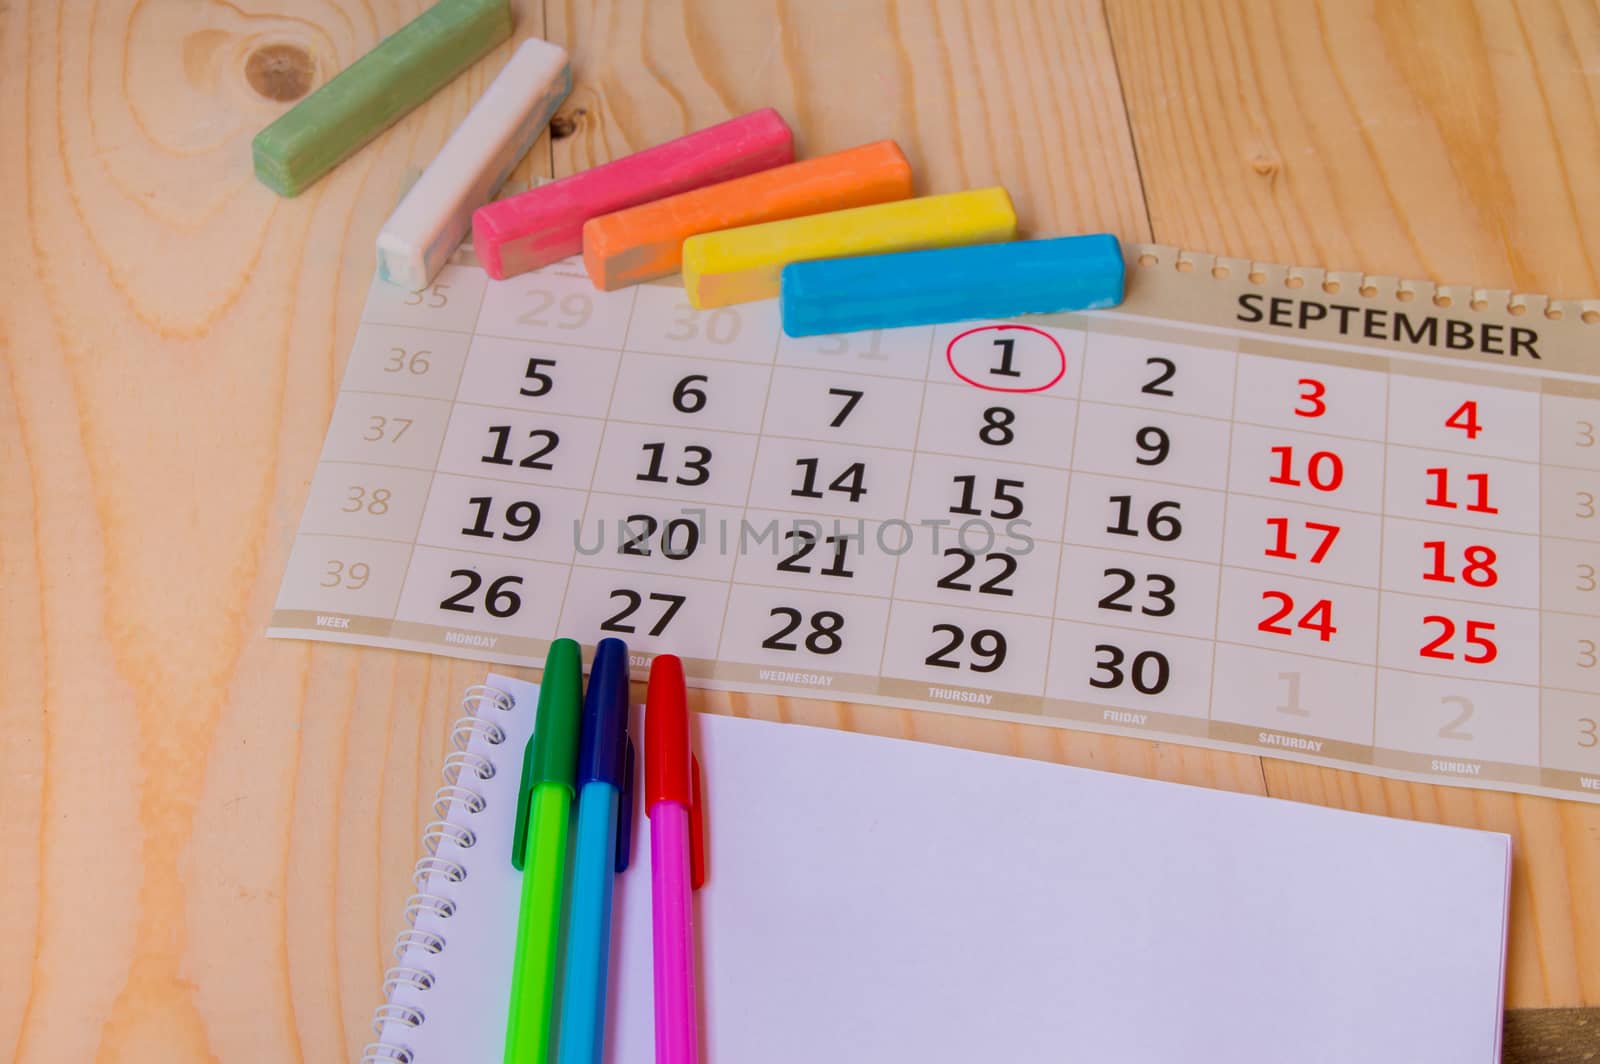 Back to school, calendar, colored chalk on wooden background.